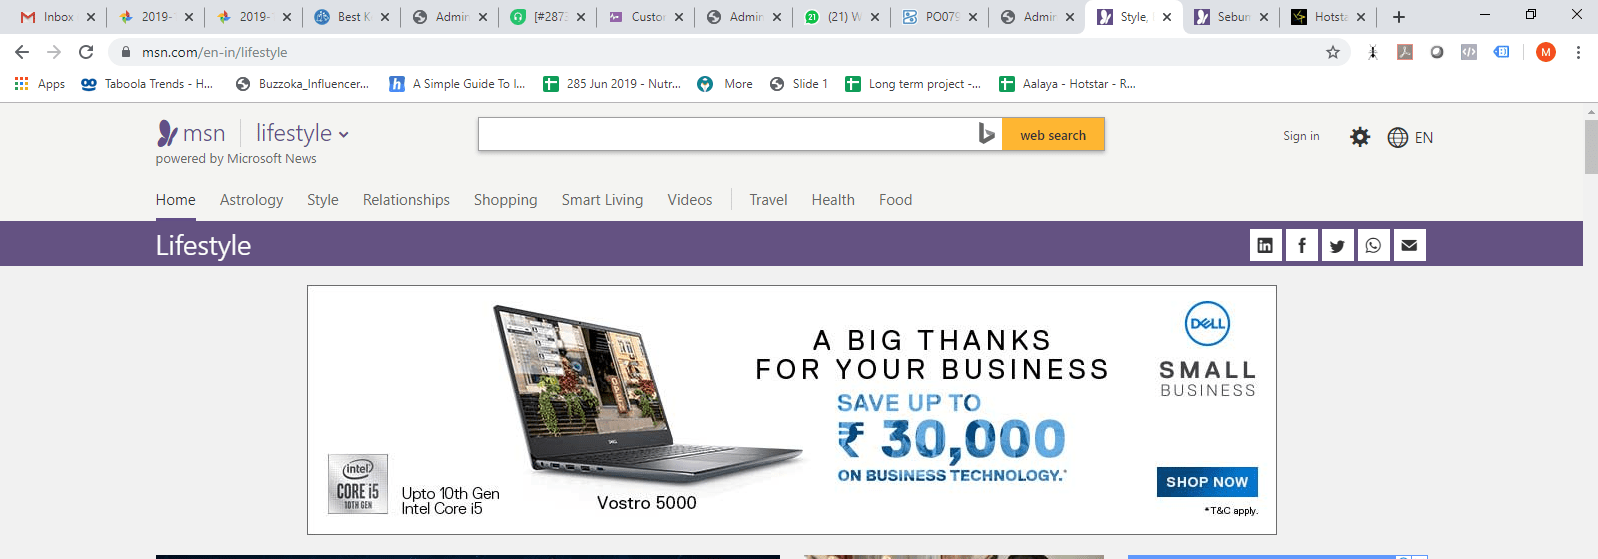 Roadblock Ad on Section Page